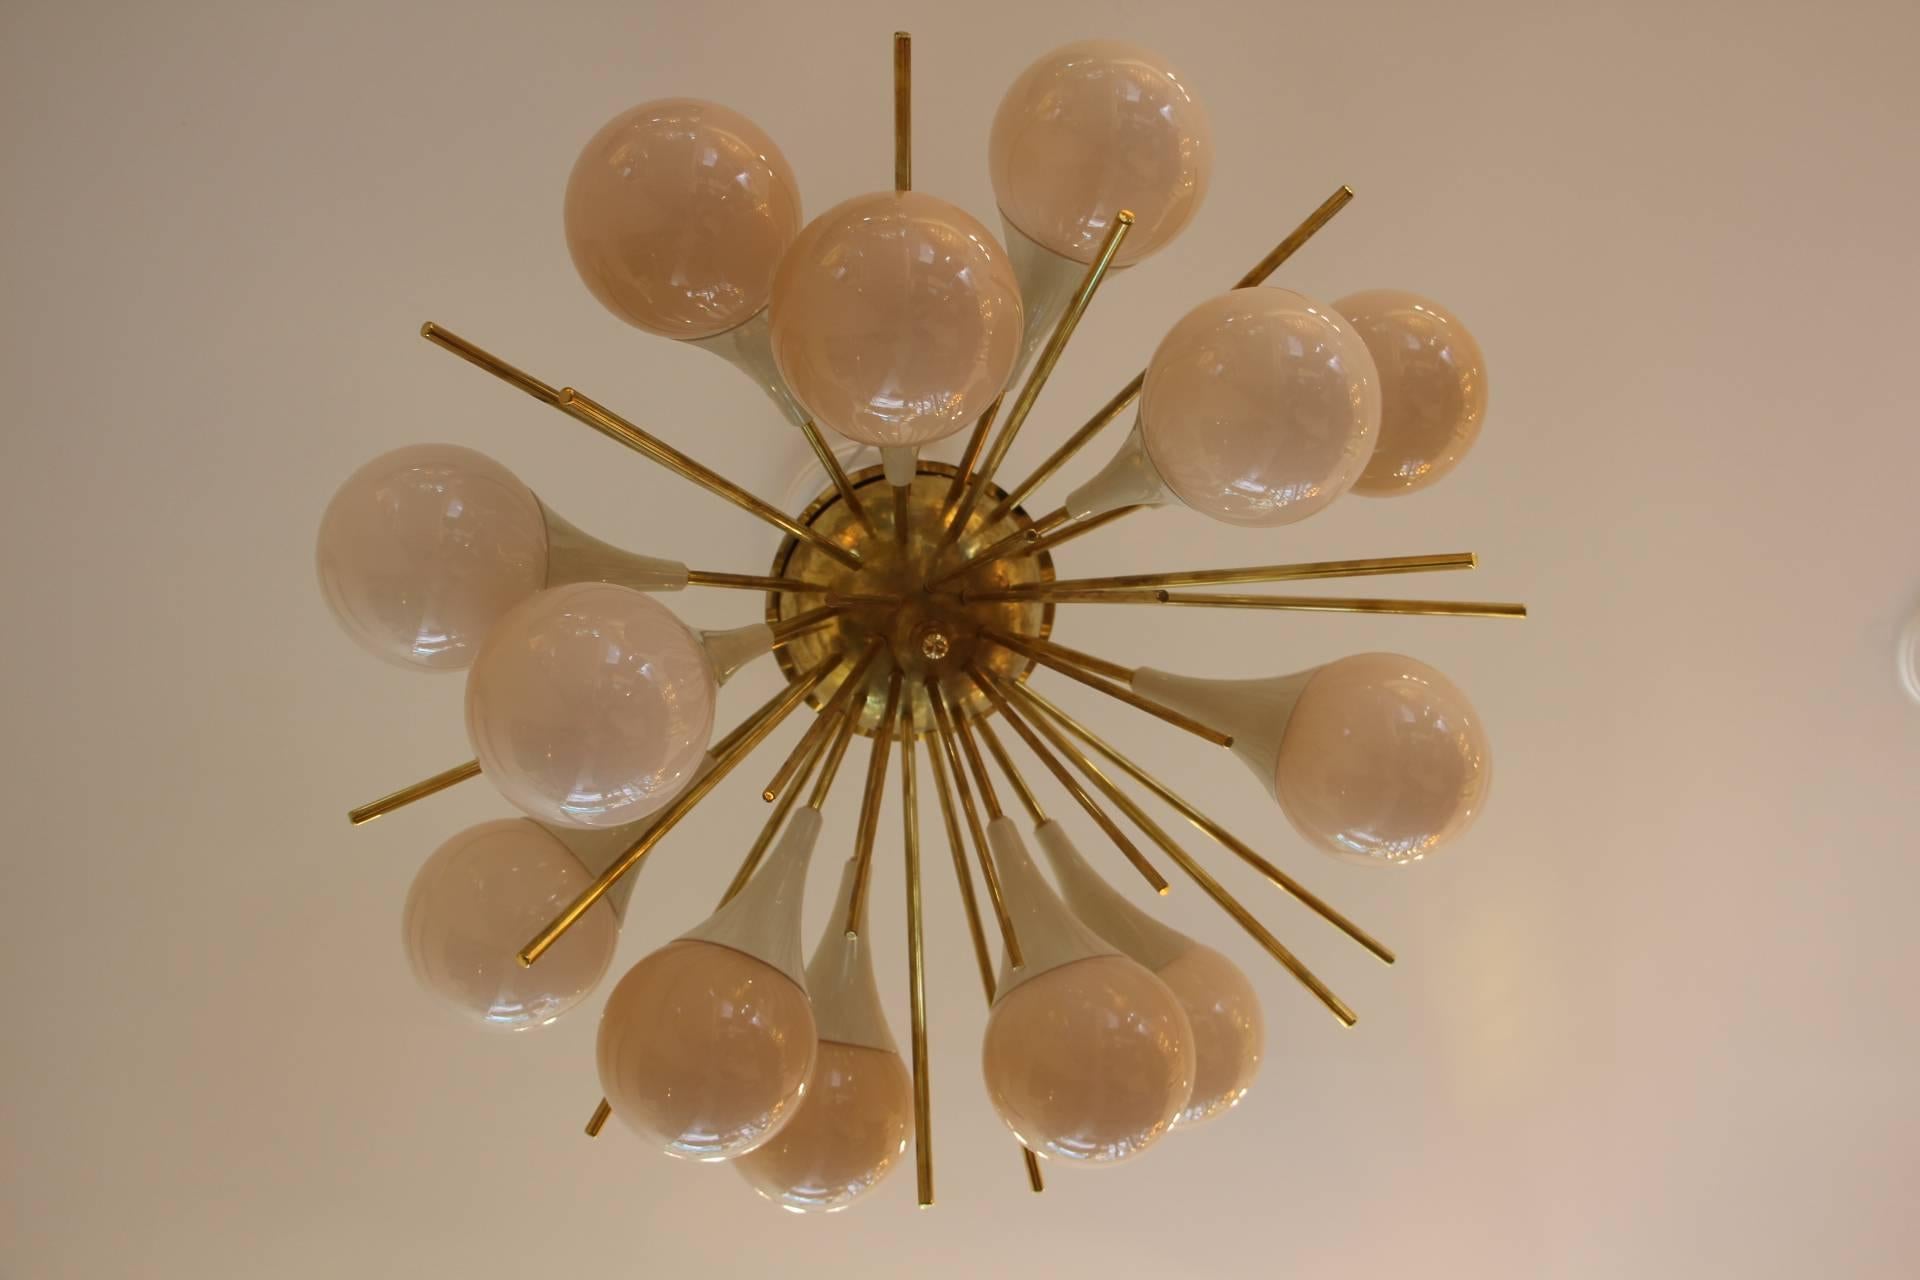 This fabulous chandelier features 15 pinkish-beige Murano glass globes and 15 brass stems.
It looks like large flowers and is really breath taking.
When light is on, its very light pink-beige globes turn to beige color.
All globes are not exactly